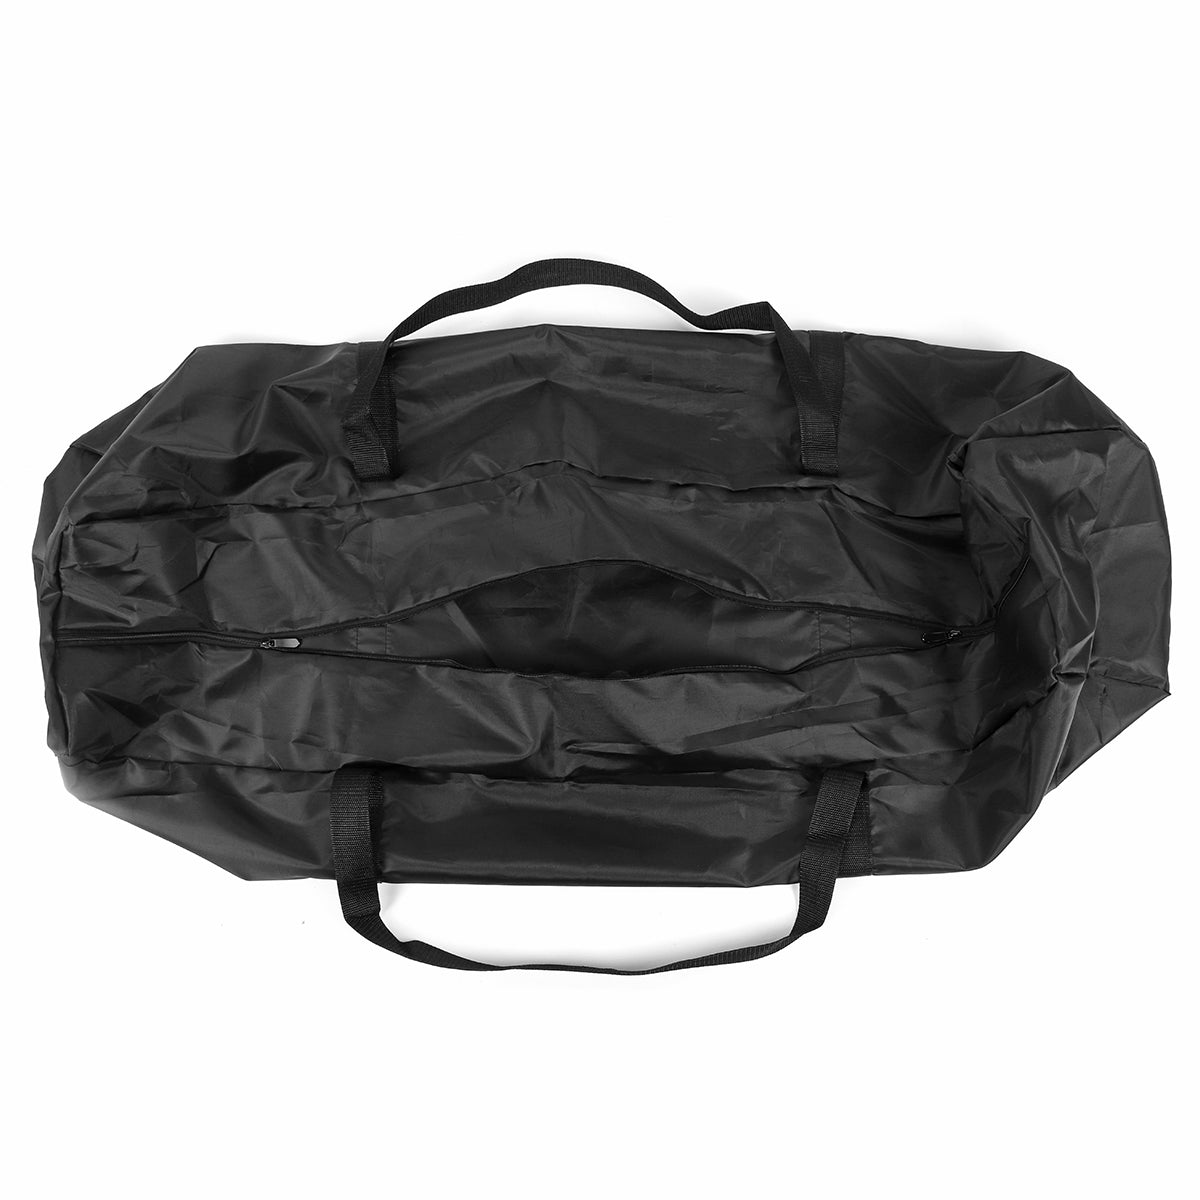 Waterproof Storage Bag Durable Portable Carry Handbag Lightweight For m365/m187/Pro Ninebot es1/2/3/4 E-TWOW S2 Electric Scooter - Auto GoShop